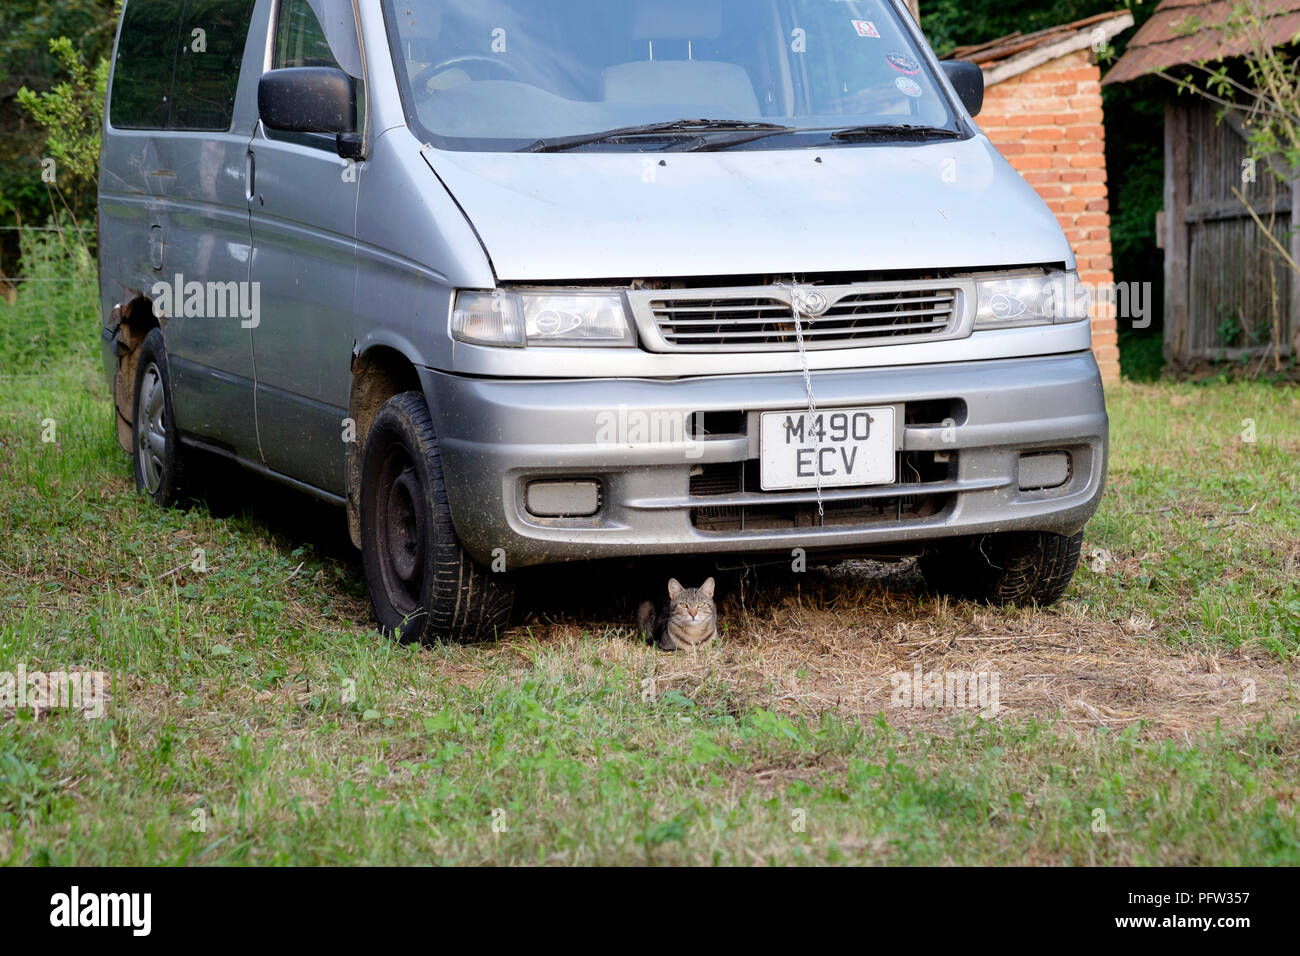 cat shelters from the sun in the shade beneath an old van parked in a garden in zala county hungary Stock Photo